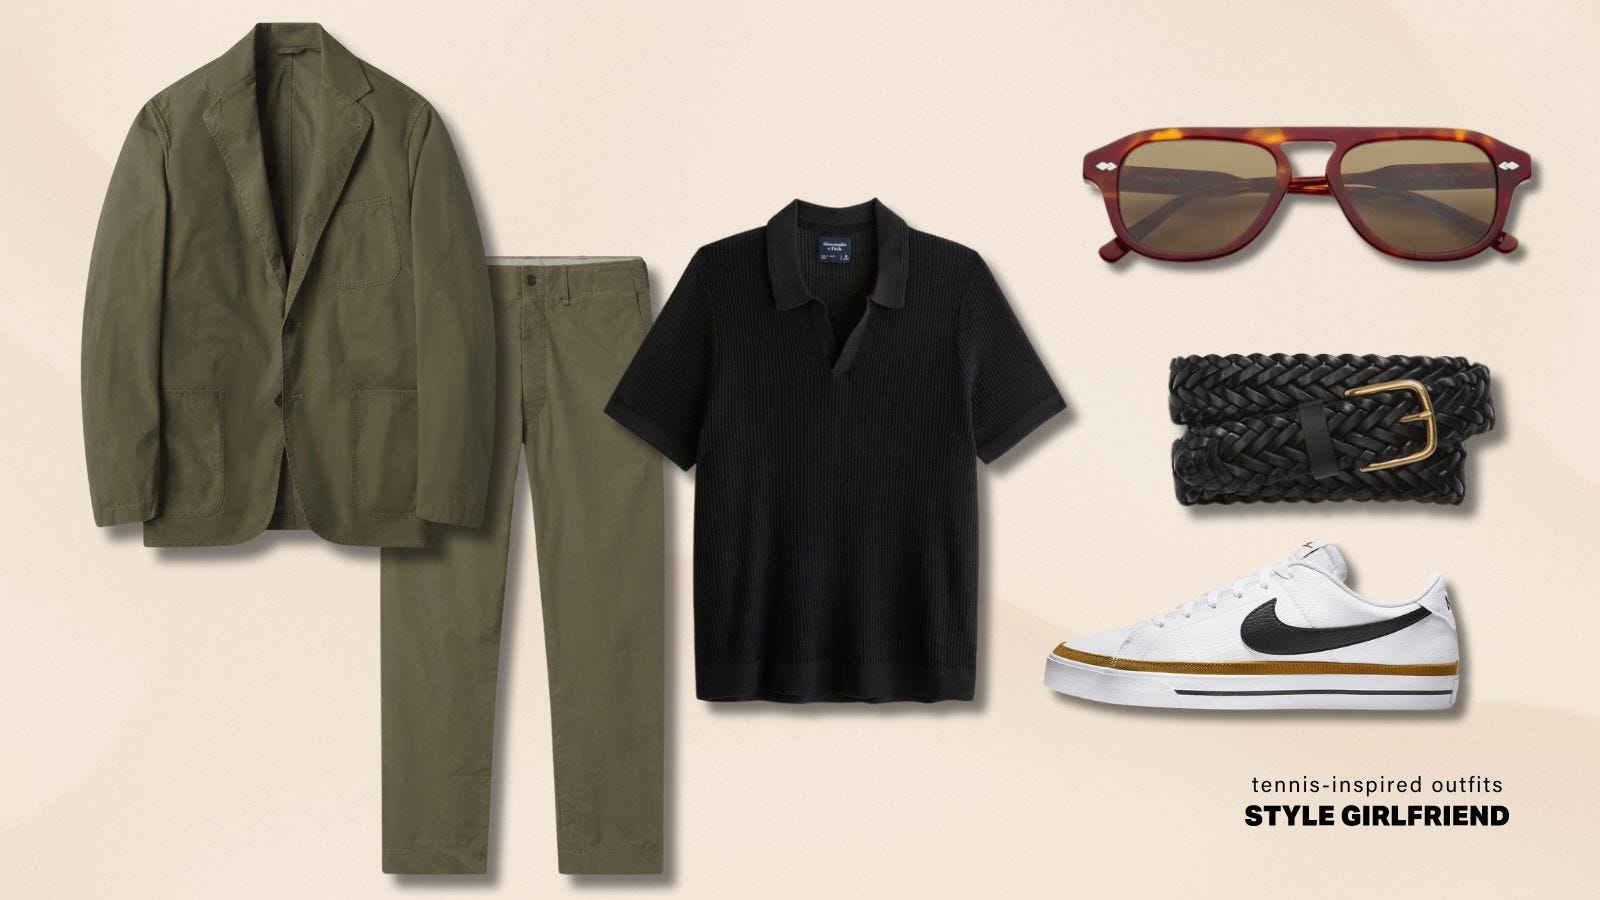 flat lay image of a casual men's suit with a black knit polo, sunglasses, braided belt, and white tennis shoes